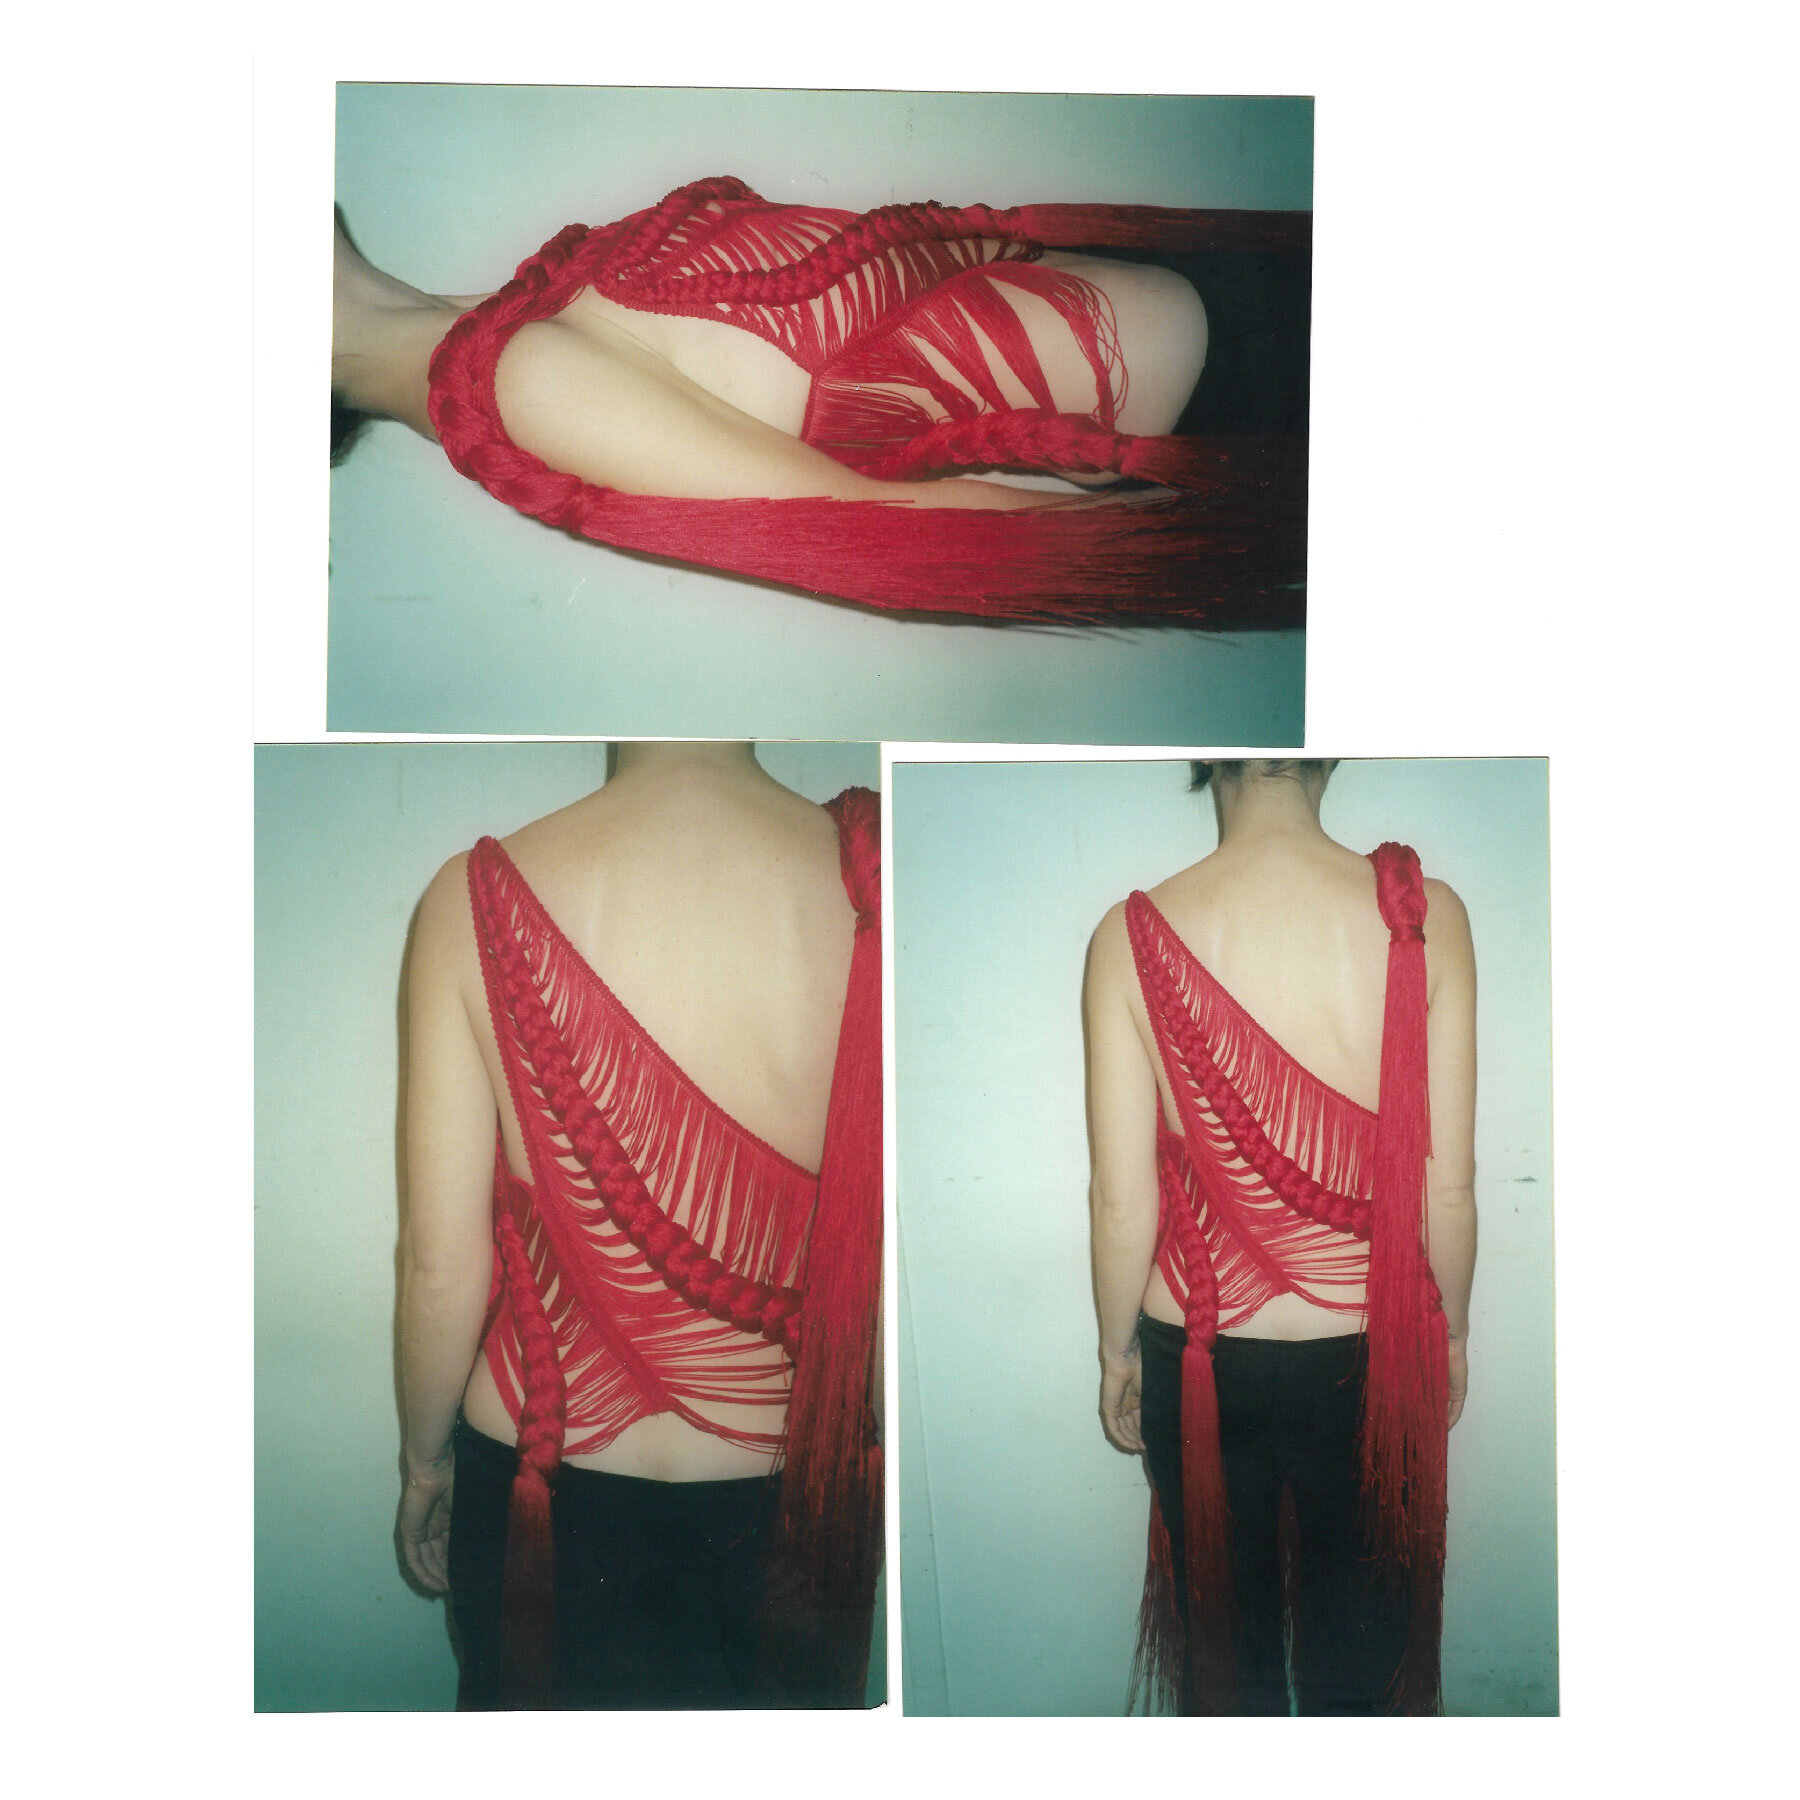  Details of the Benjamin Cho look from a fitting in September, 2000.  Images via Cathy Cho  